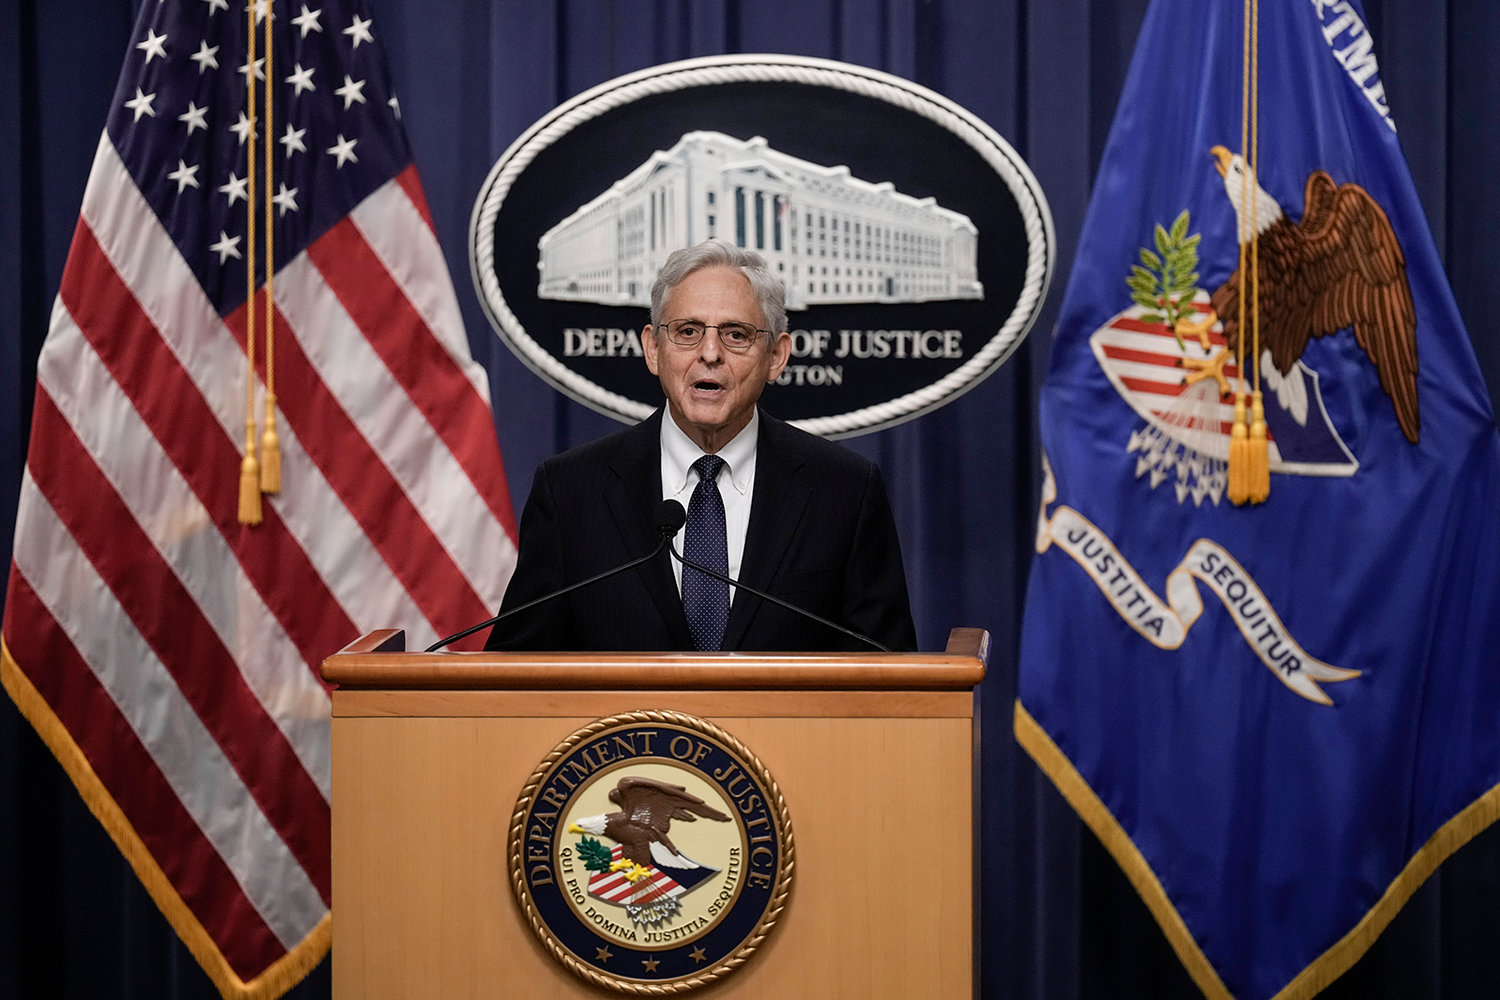 U.S. Attorney General Merrick Garland delivers a statement at the U.S. Department of Justice Aug. 11, 2022, in Washington, DC. Garland addressed the FBI's recent search of former President Donald Trump's Mar-a-Lago residence, announcing the Justice Department has filed a motion to unseal the search warrant as well as a property receipt for what was taken. (Drew Angerer/Getty Images/TNS)